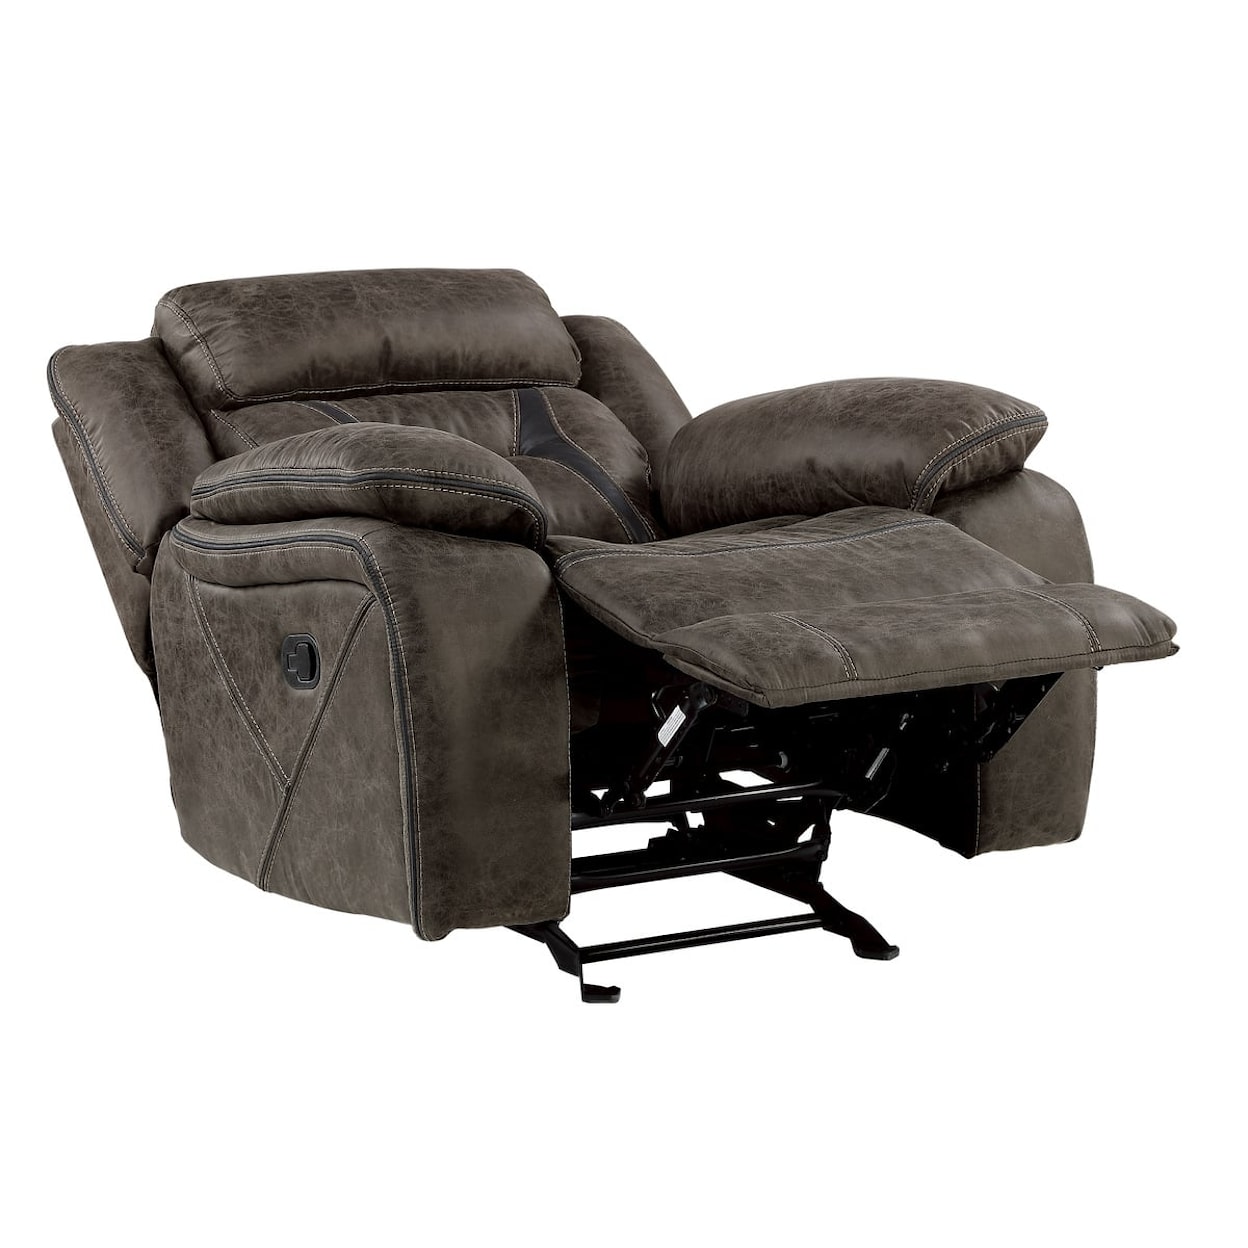 Homelegance Furniture Hill Madrona Glider Reclining Chair